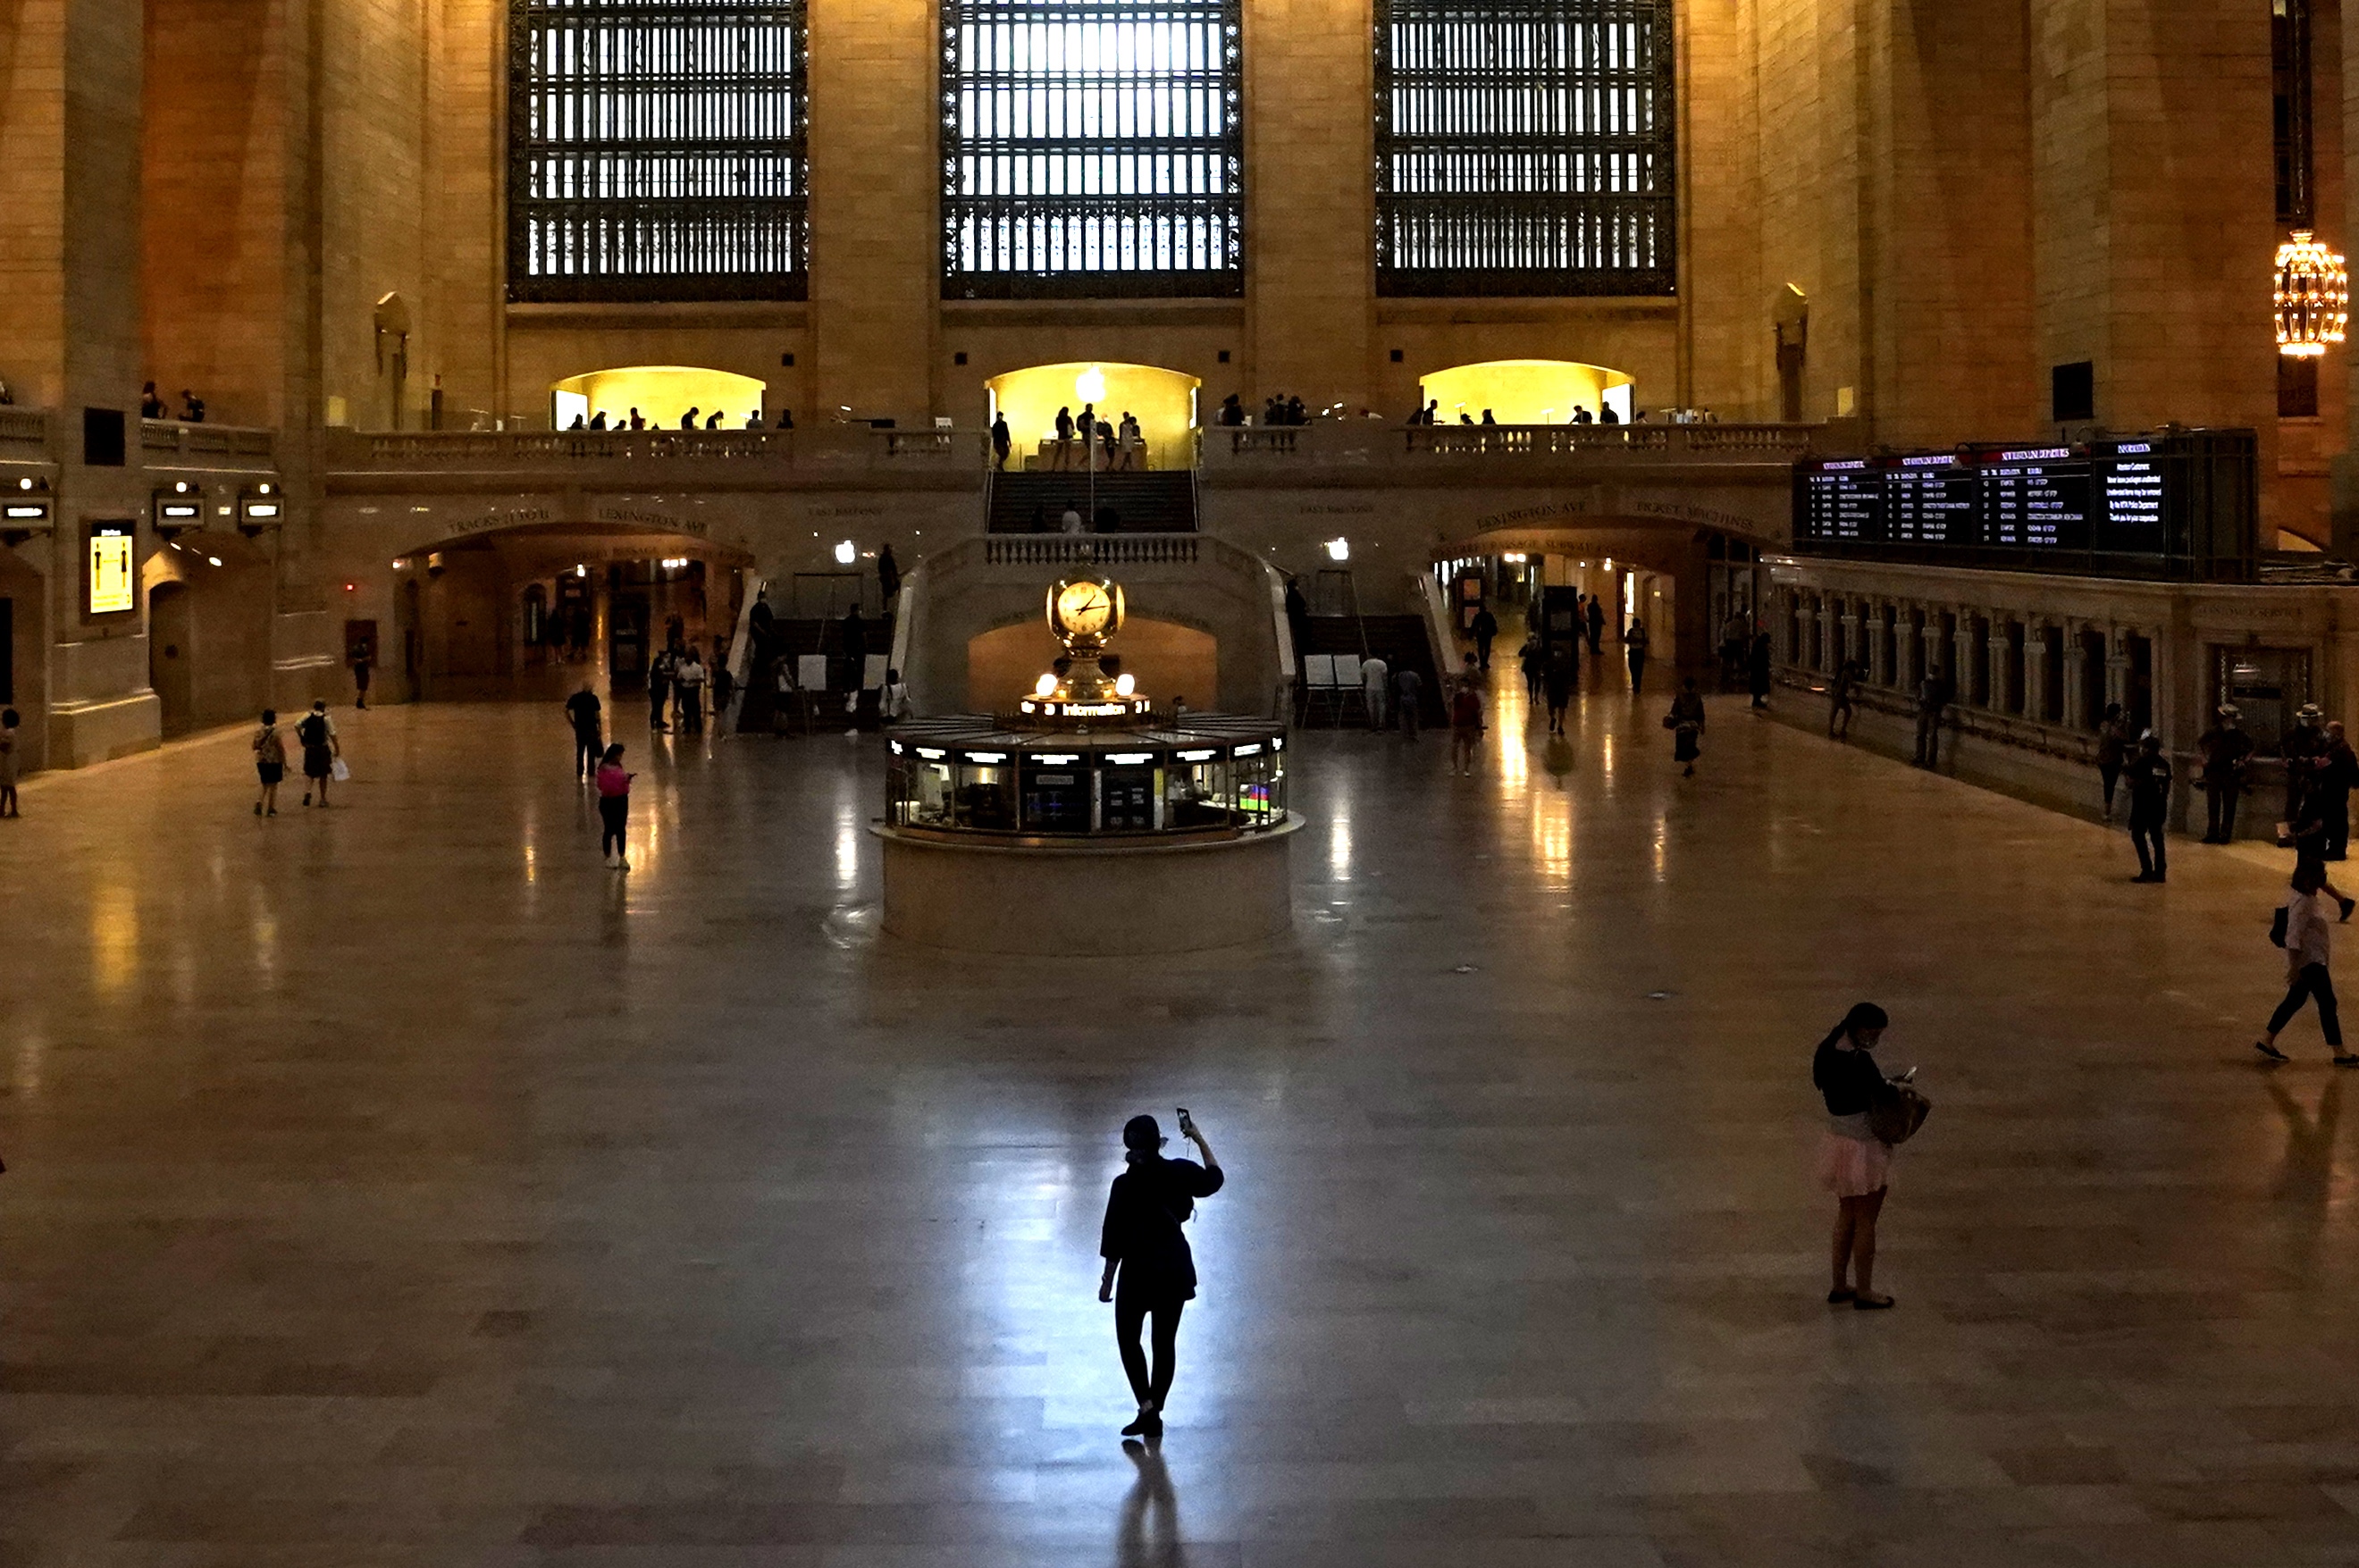 A woman stands with her cellphone in Grand Central Terminal, the historic world-famous landmark and transportation hub in Midtown Manhattan July 21, 2020 in New York. - The station is the southern terminus of the Metro-North Railroad's Harlem, Hudson and New Haven Lines and ridership has been down during the height of the coronavirus pandemic. (Photo by TIMOTHY A. CLARY / AFP) (Photo by TIMOTHY A. CLARY/AFP via Getty Images)